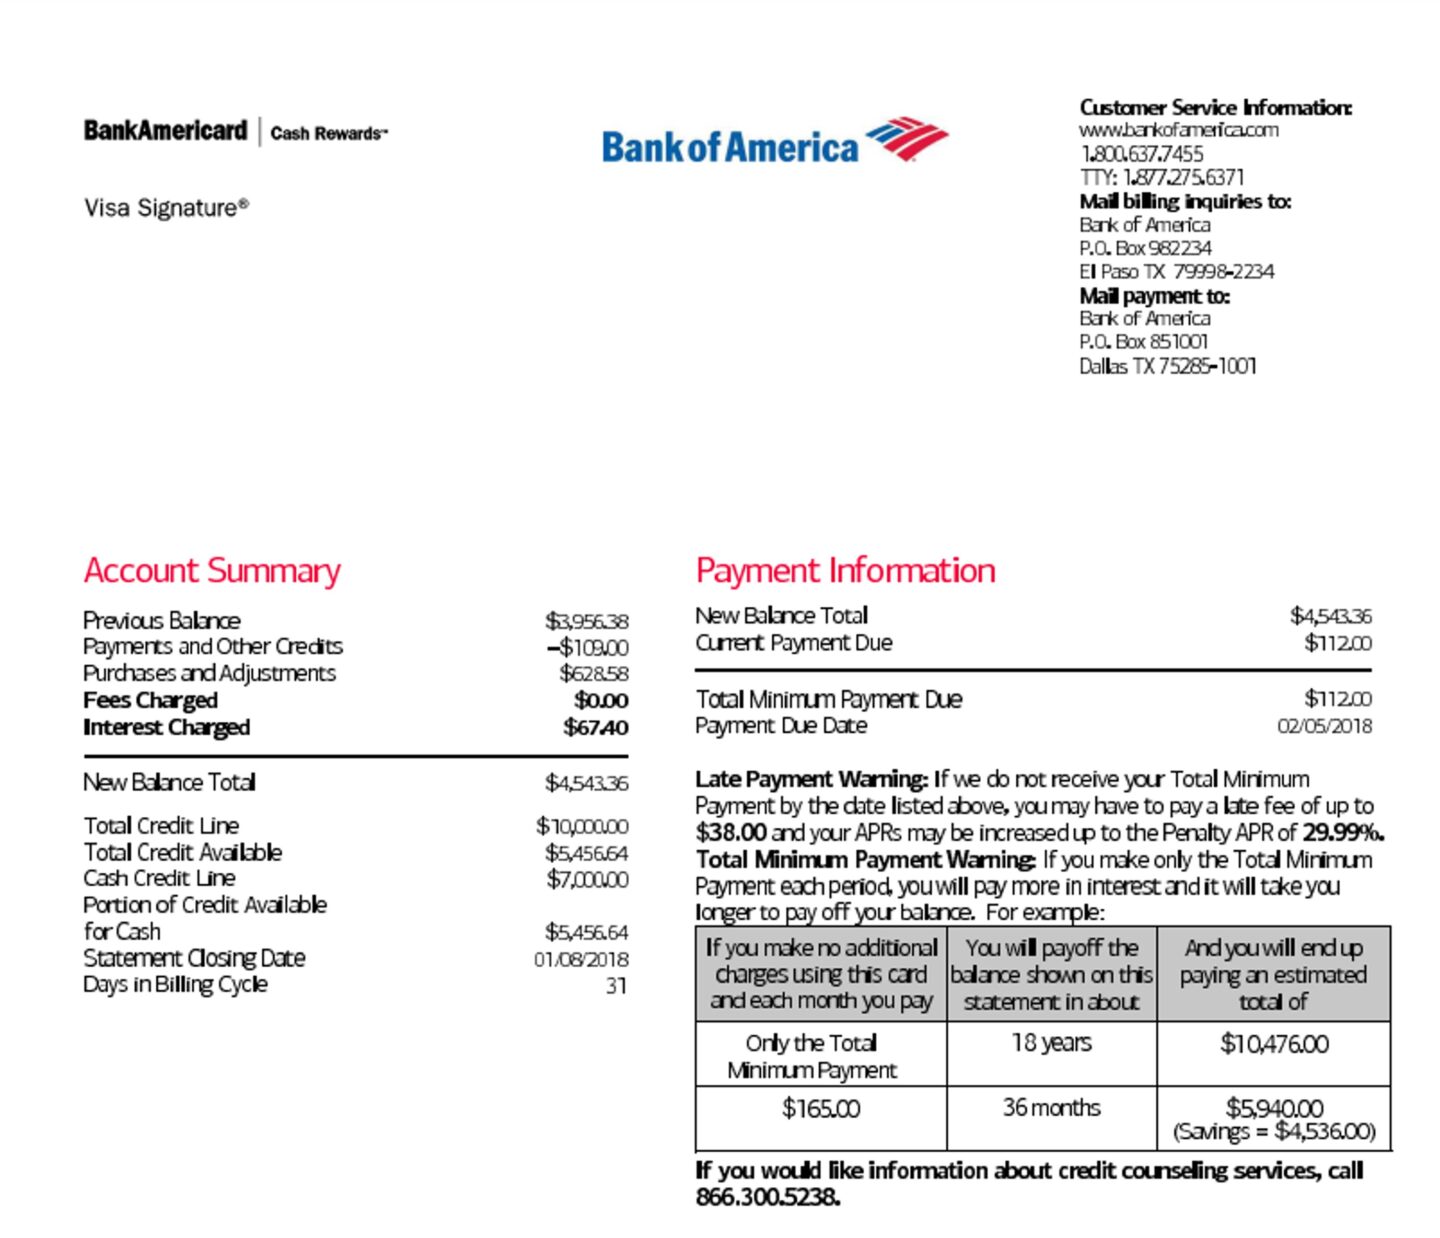 example of a real bank statement from bank of america